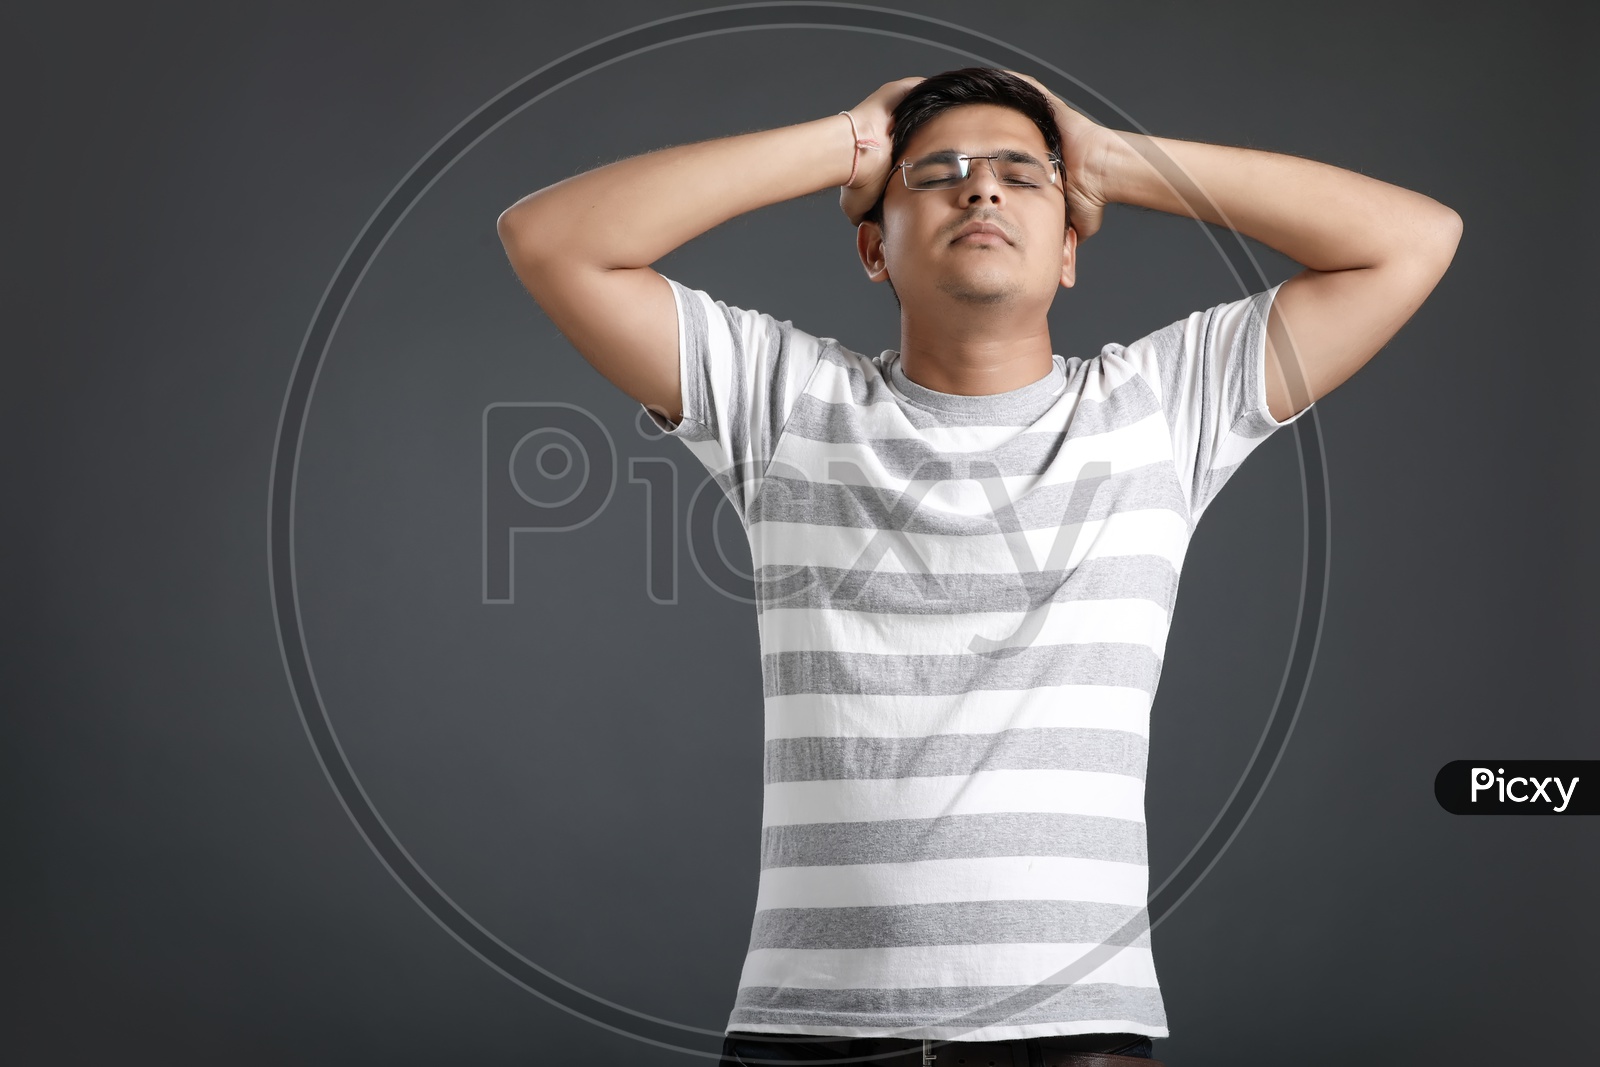 Frustrated Stressed Young Man Holding Head With Hands And Posing Over an Isolated Black Background